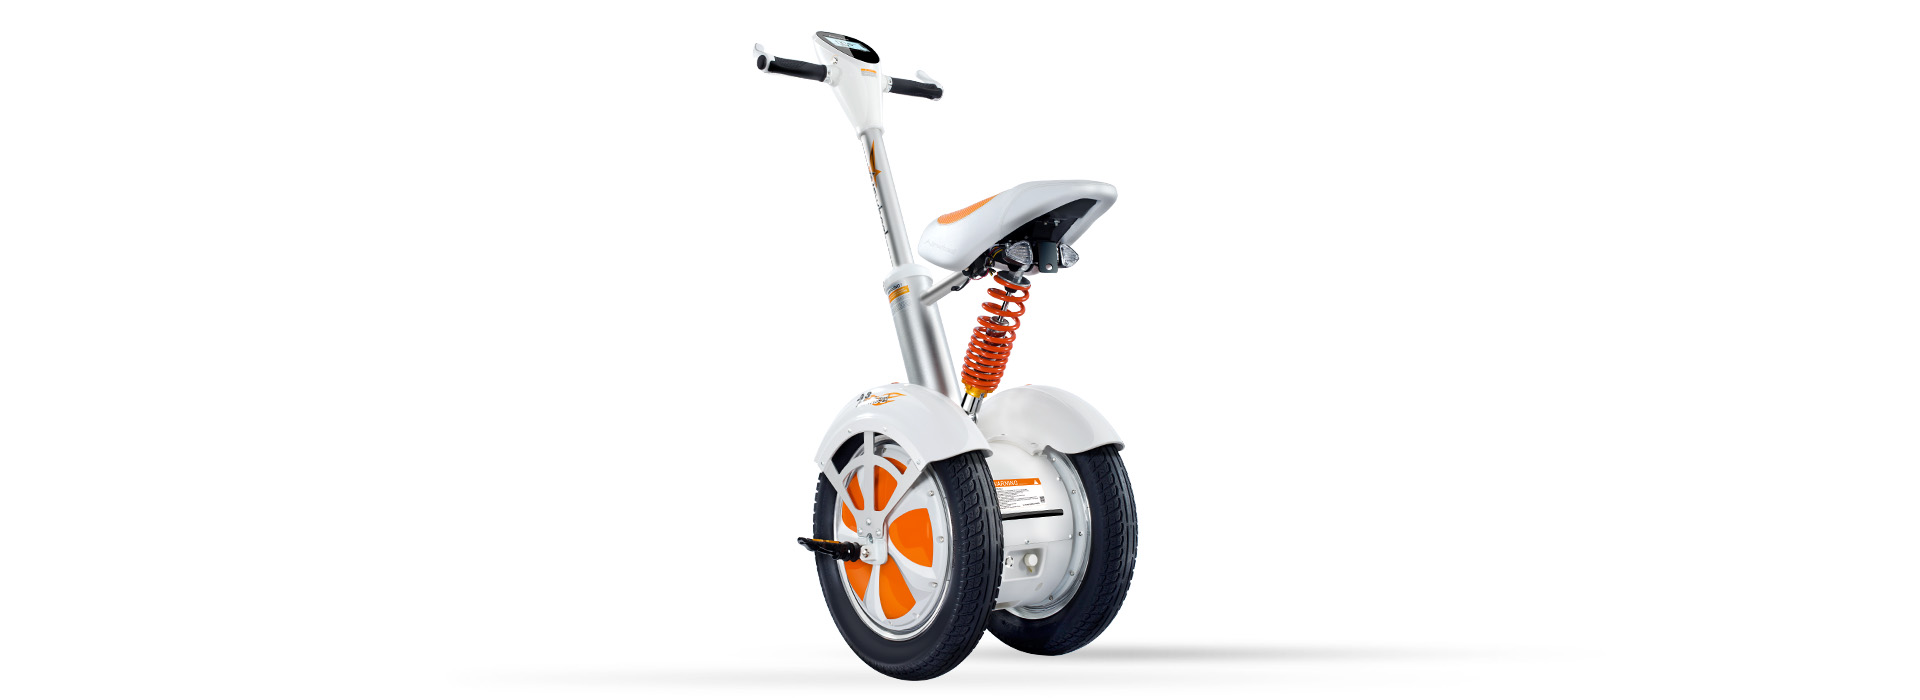 saddle-equipped self-balancing intelligent scooter